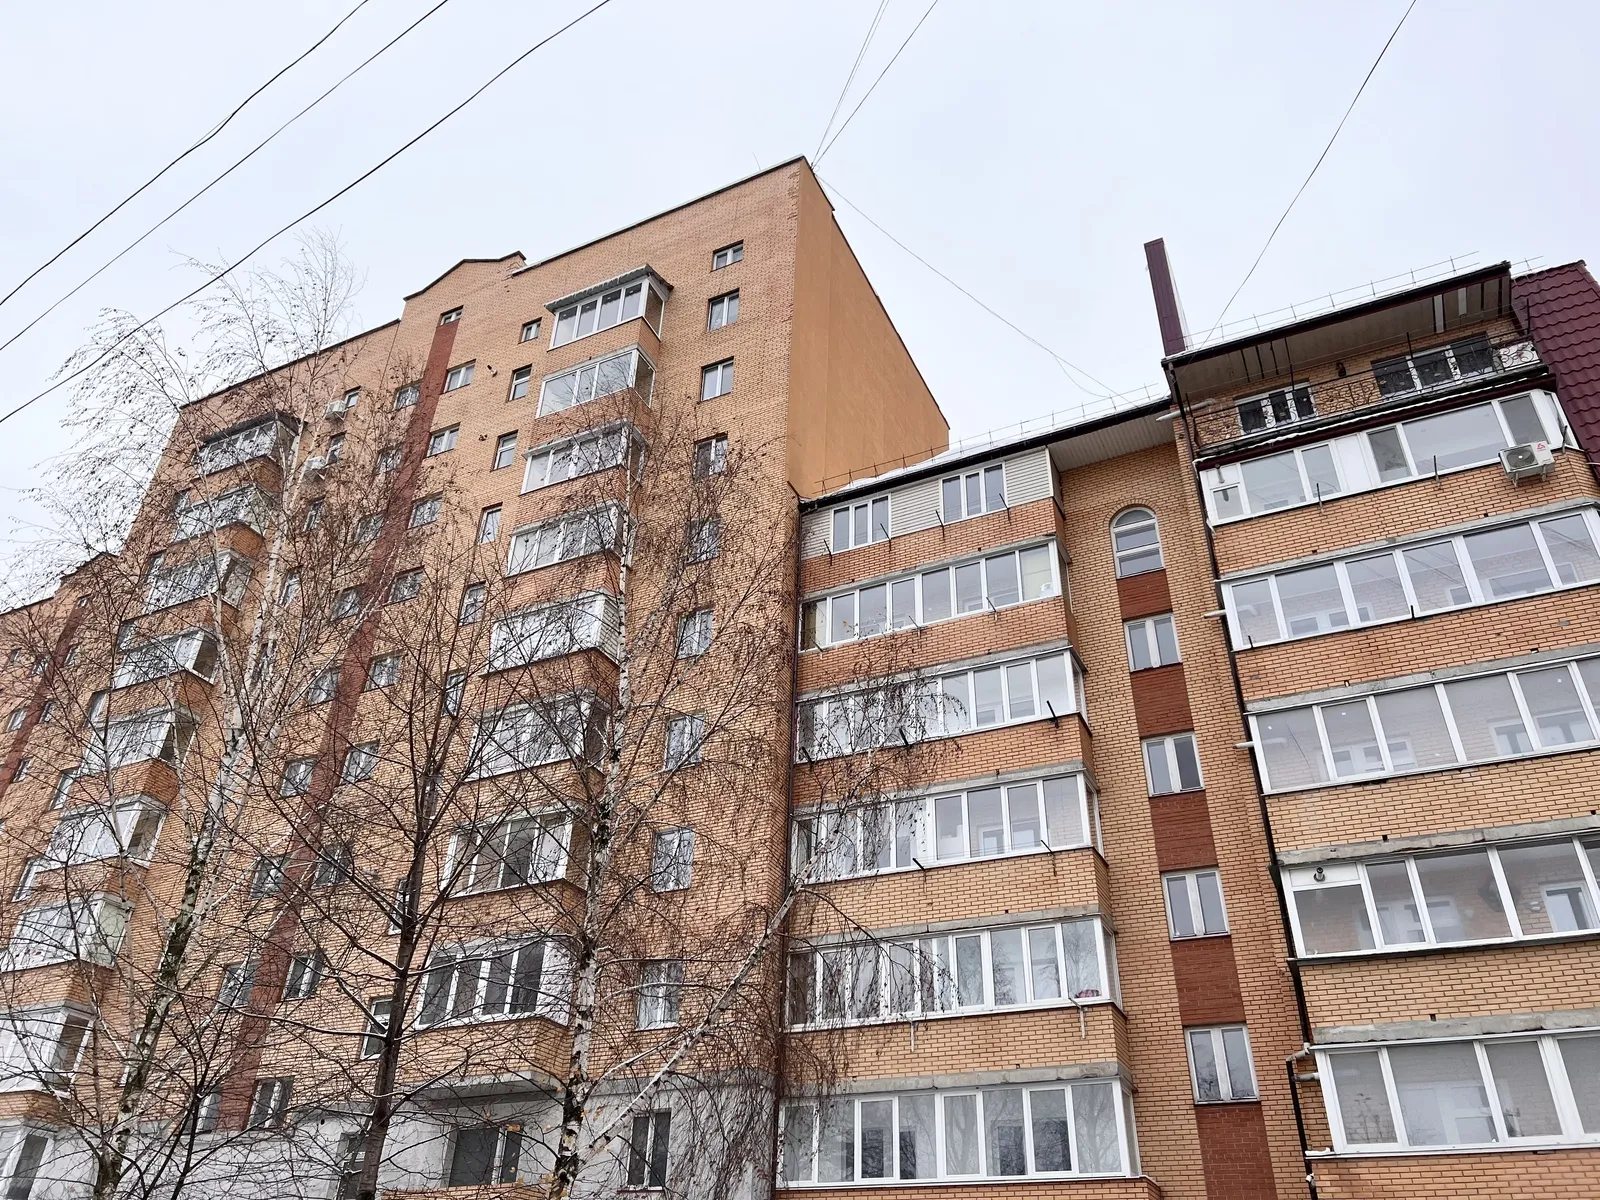 Apartments for sale. 3 rooms, 144 m², 10th floor/11 floors. Troleybusna vul., Ternopil. 